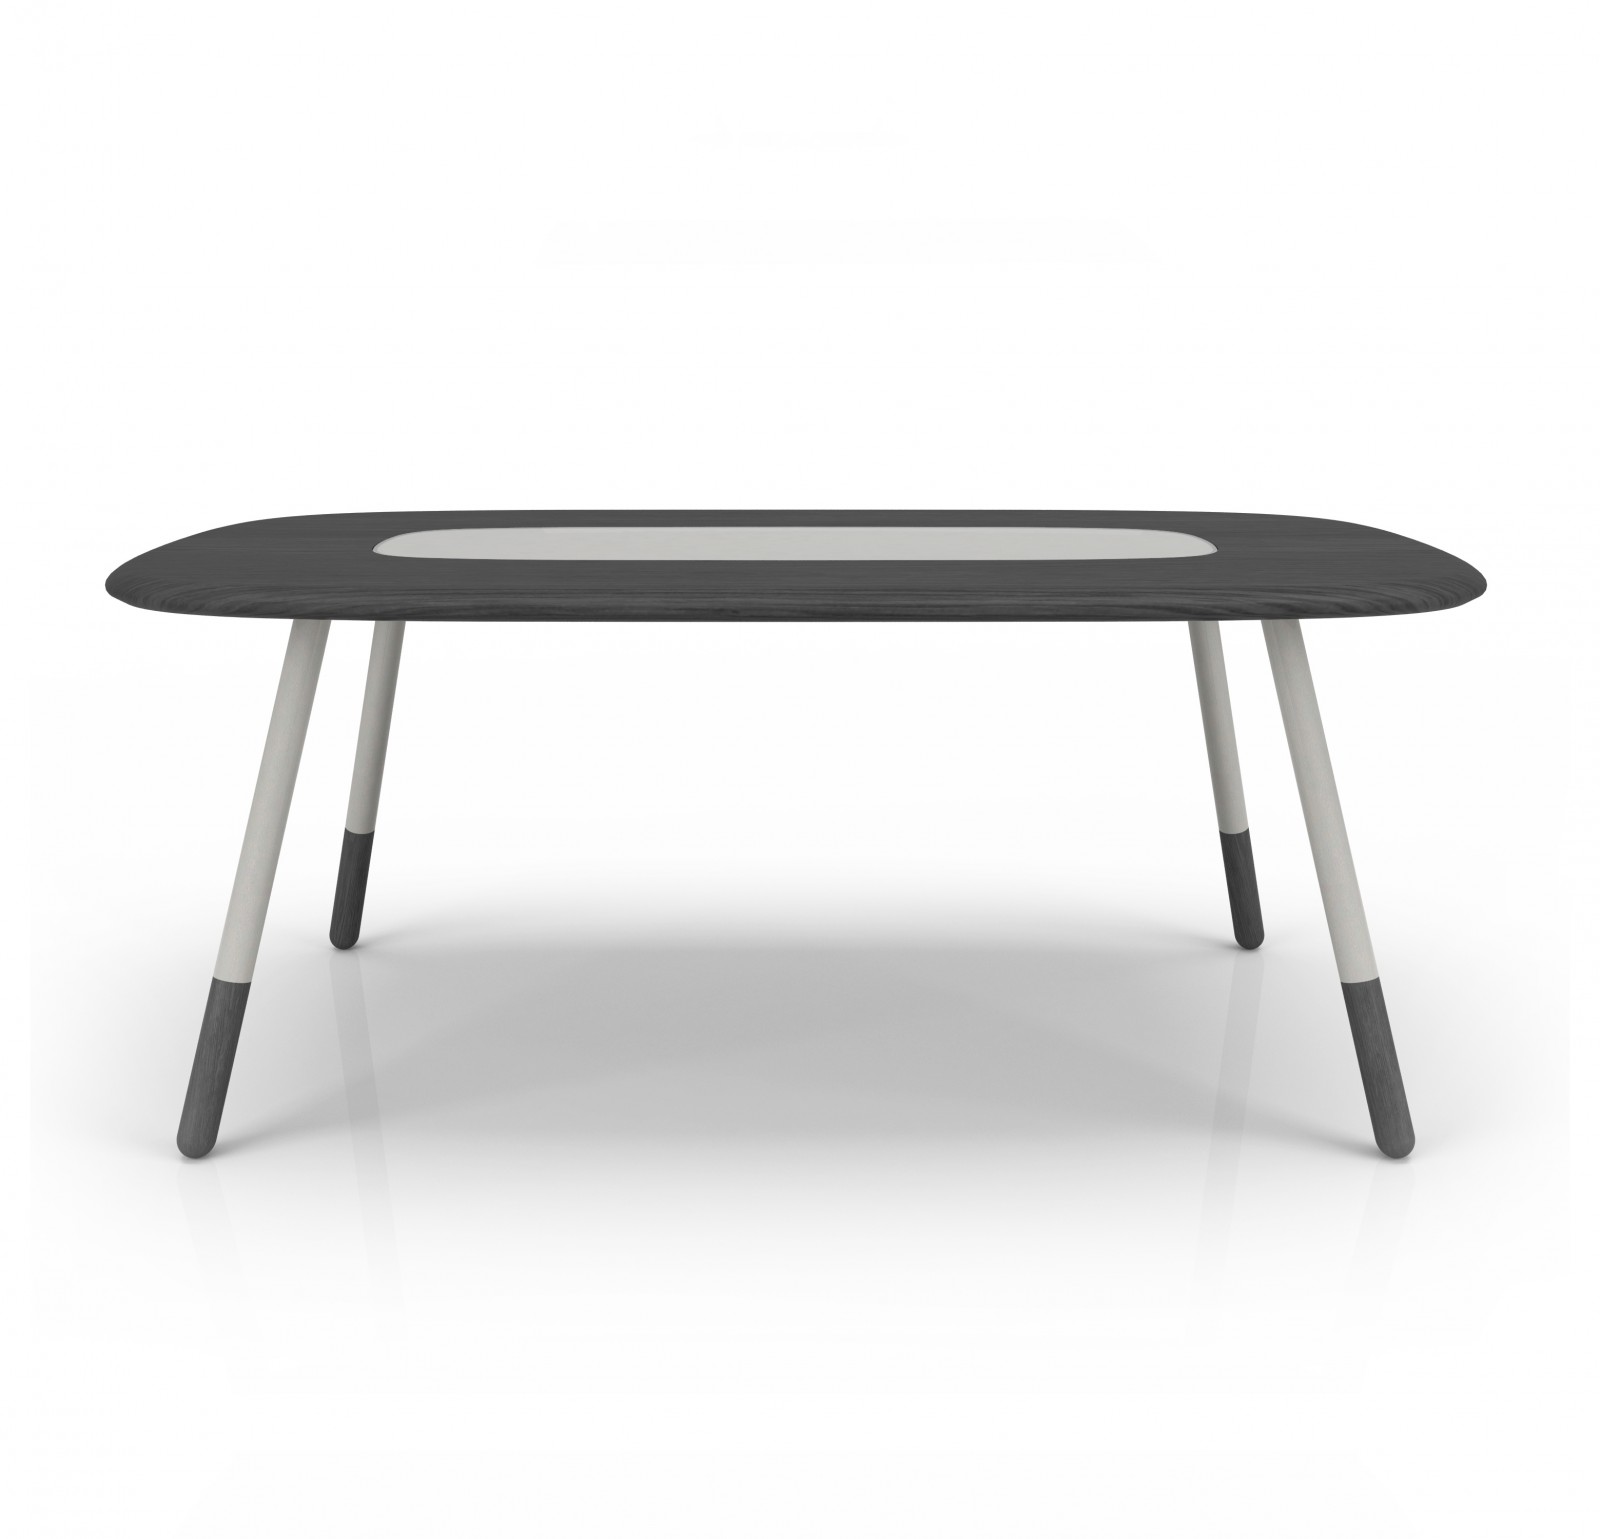 78'' table with lacquered glass